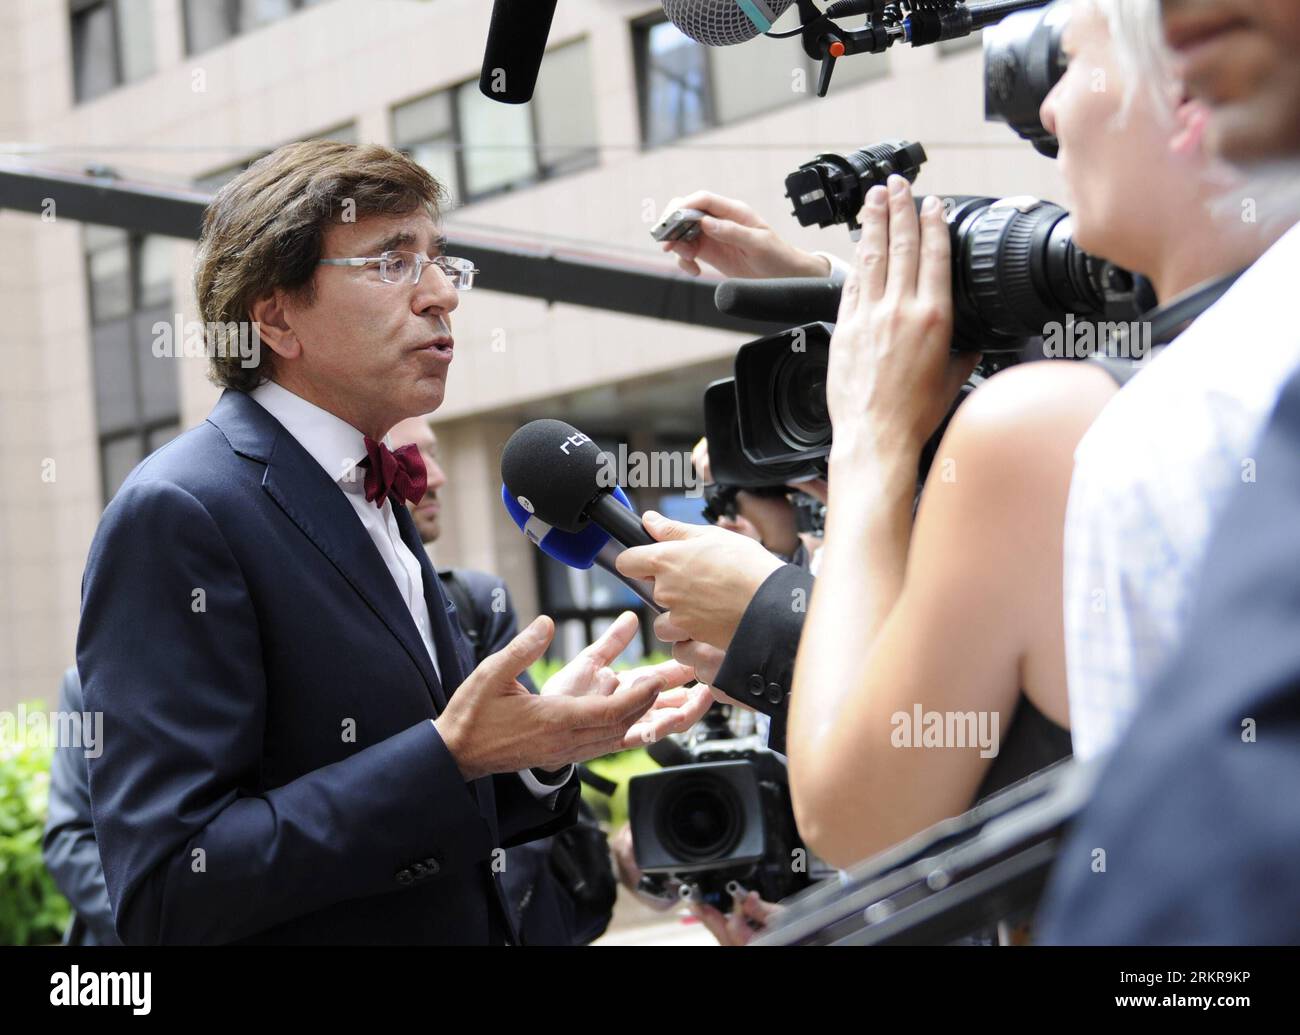 Bildnummer: 58159653  Datum: 28.06.2012  Copyright: imago/Xinhua (120628) -- BRUSSELS, June 28, 2012 (Xinhua) -- Belgian Prime Minister Elio Di Rupo arrives for the EU summit at EU s headquarters in Brussels, capital of Belgium, on June 28, 2012. European leaders are expected to focus on boosting growth and building a stronger Economic and Monetary Union (EMU) during the summit on Thursday and Friday. (Xinhua/Alyssa Goodman)(ypf) BELGIUM-EU-SUMMIT PUBLICATIONxNOTxINxCHN People Politik Gipfel Gipfeltreffen premiumd xns x0x 2012 quer      58159653 Date 28 06 2012 Copyright Imago XINHUA  Brussels Stock Photo